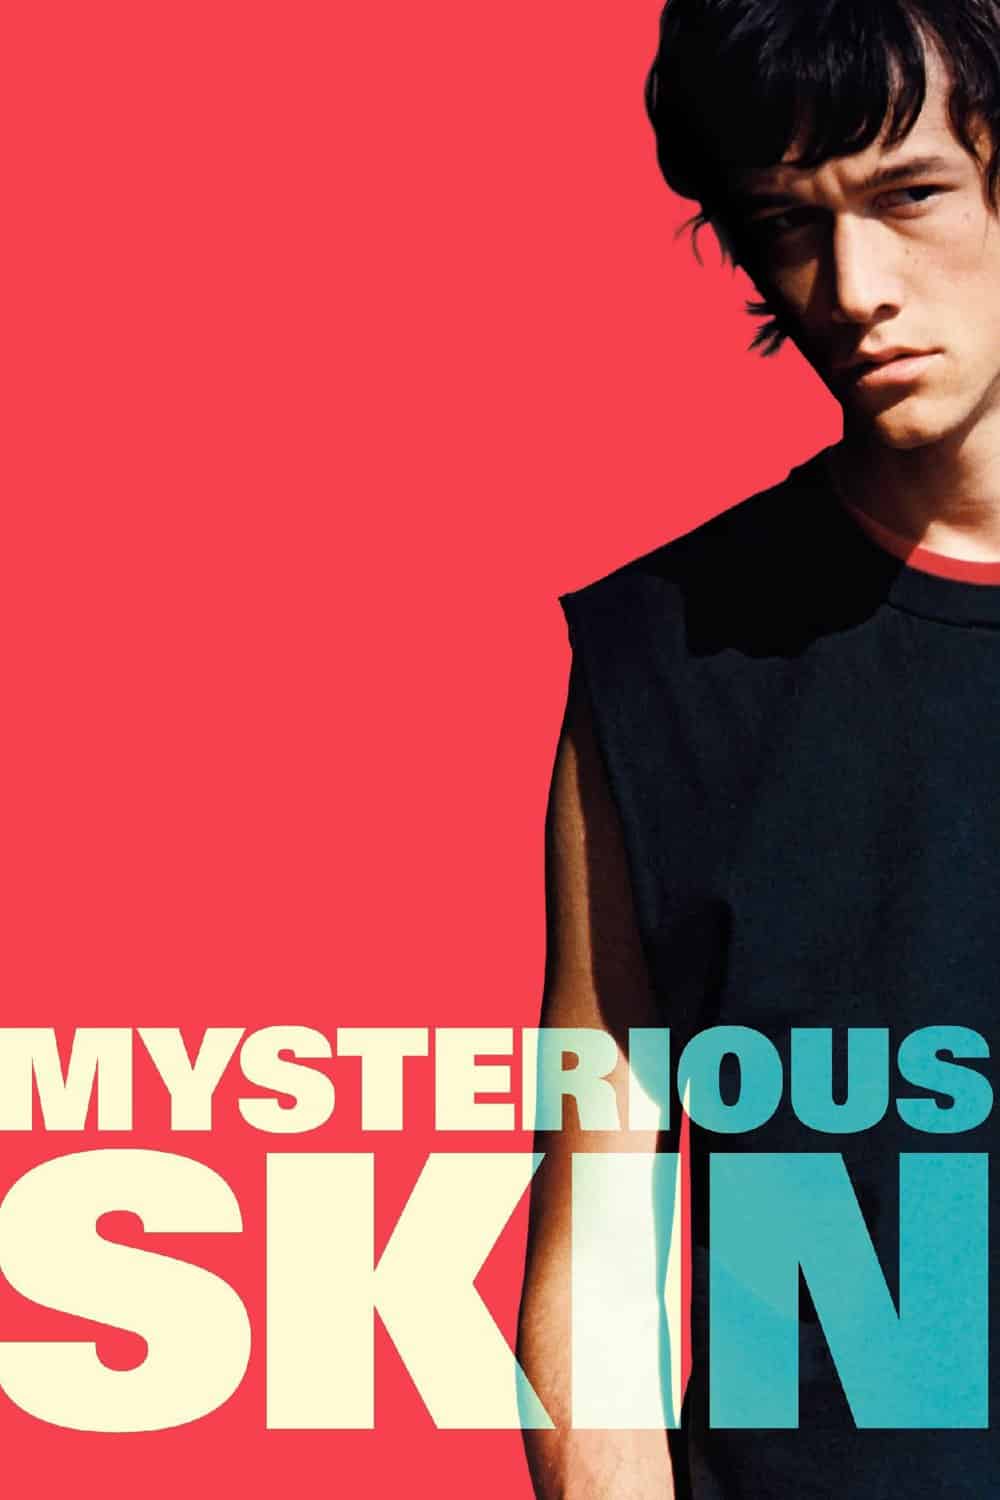 Mysterious Skin, 2004 